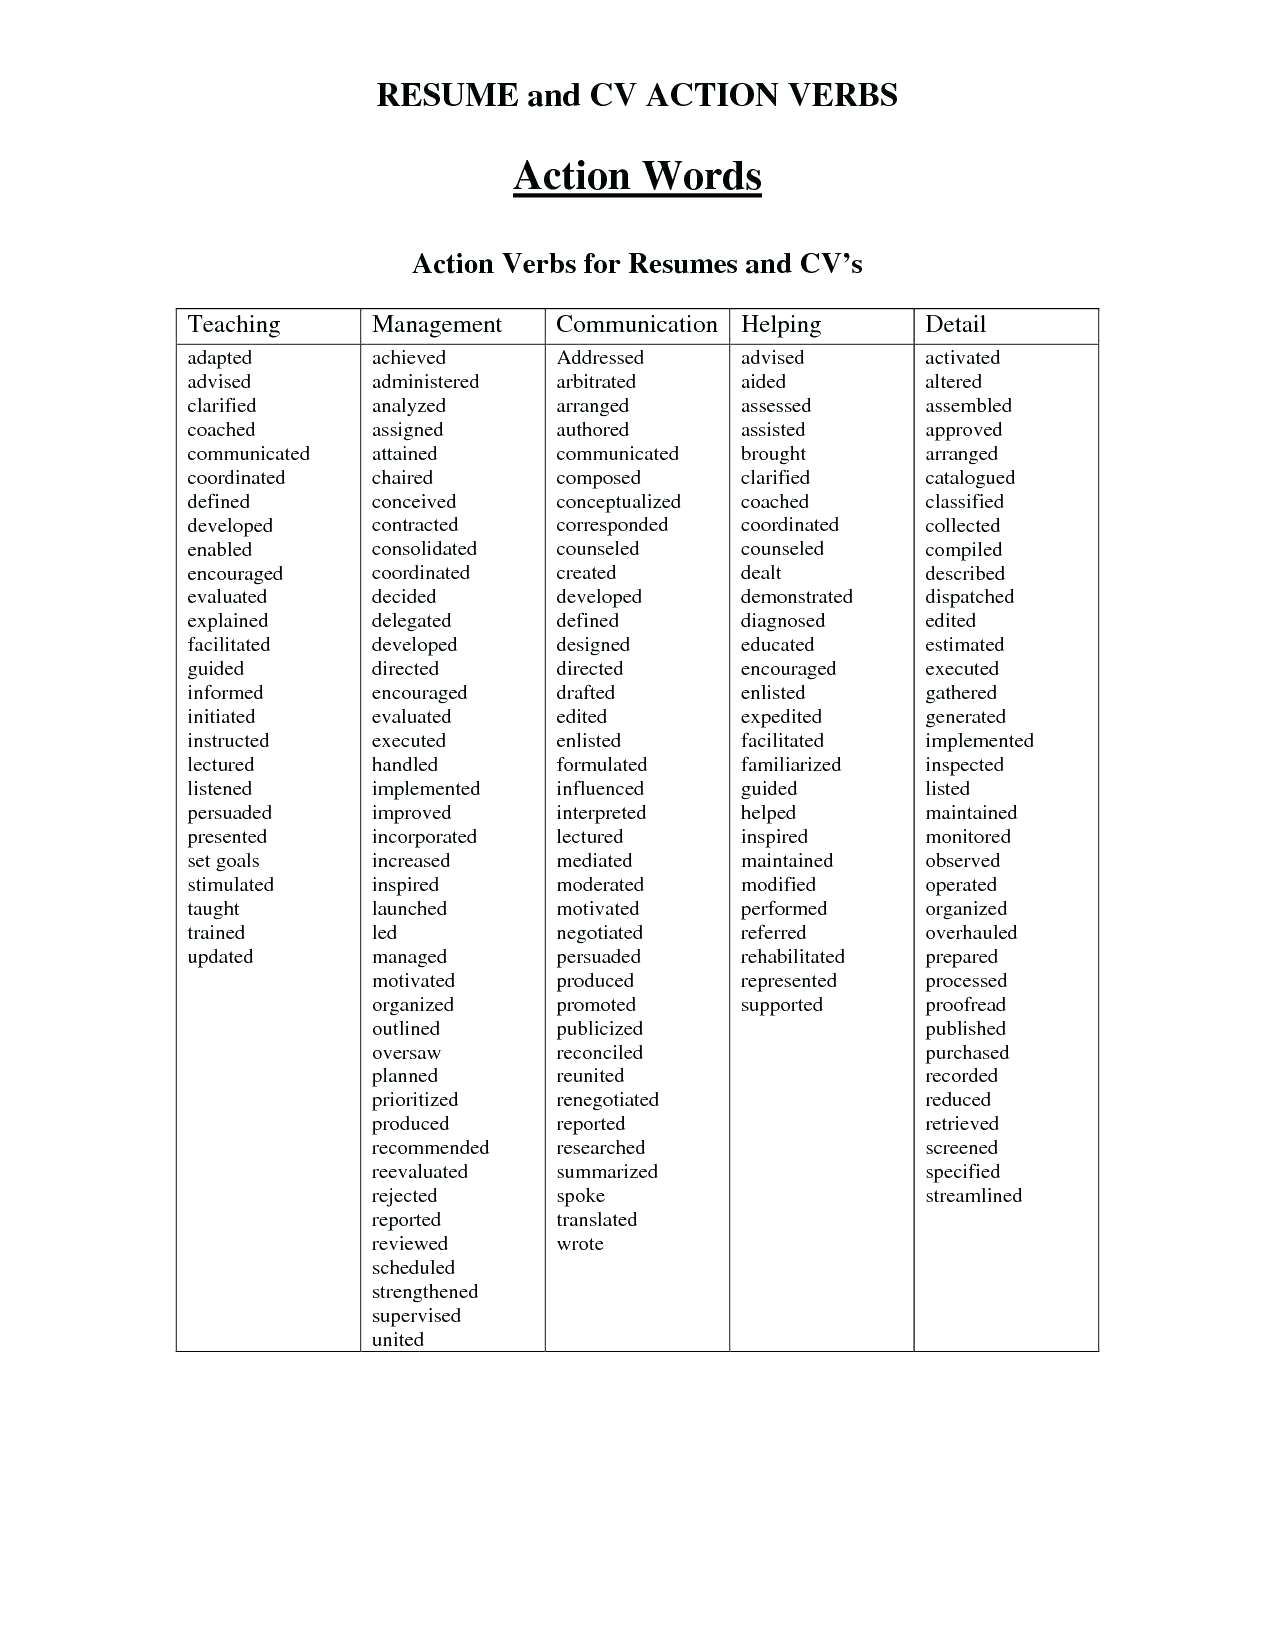 Resume Action Words  Action Verbs List Pretty Words Word Co Resume Job A Cover Letter